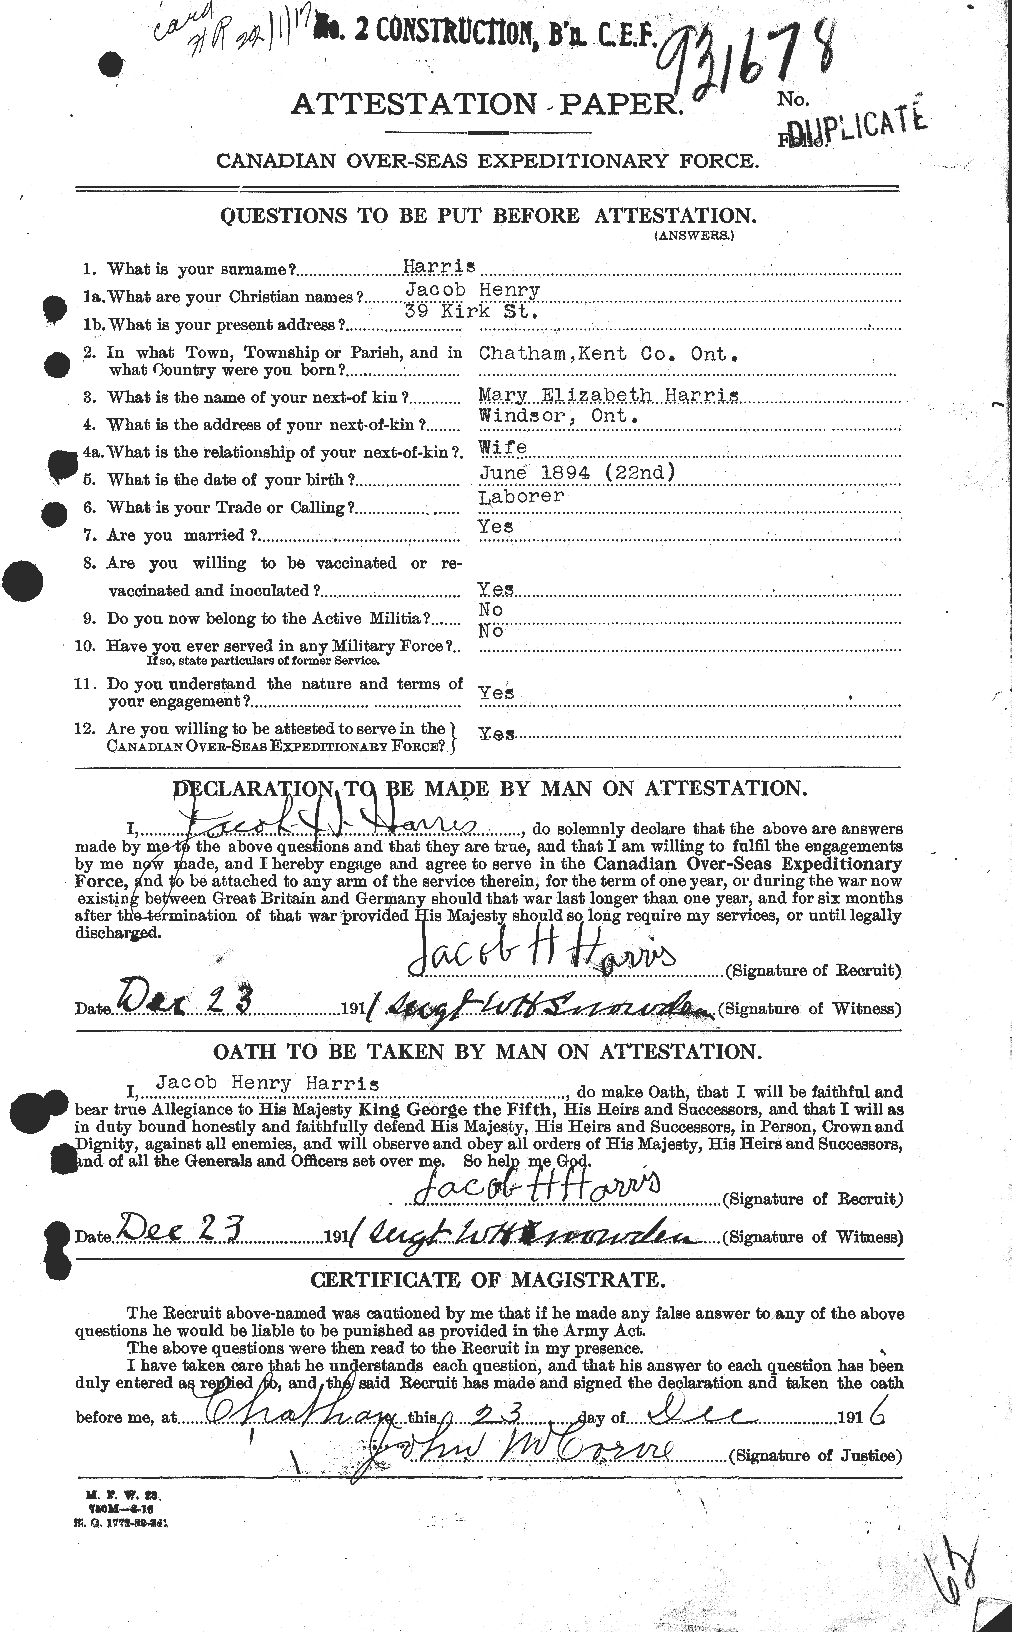 Personnel Records of the First World War - CEF 377170a